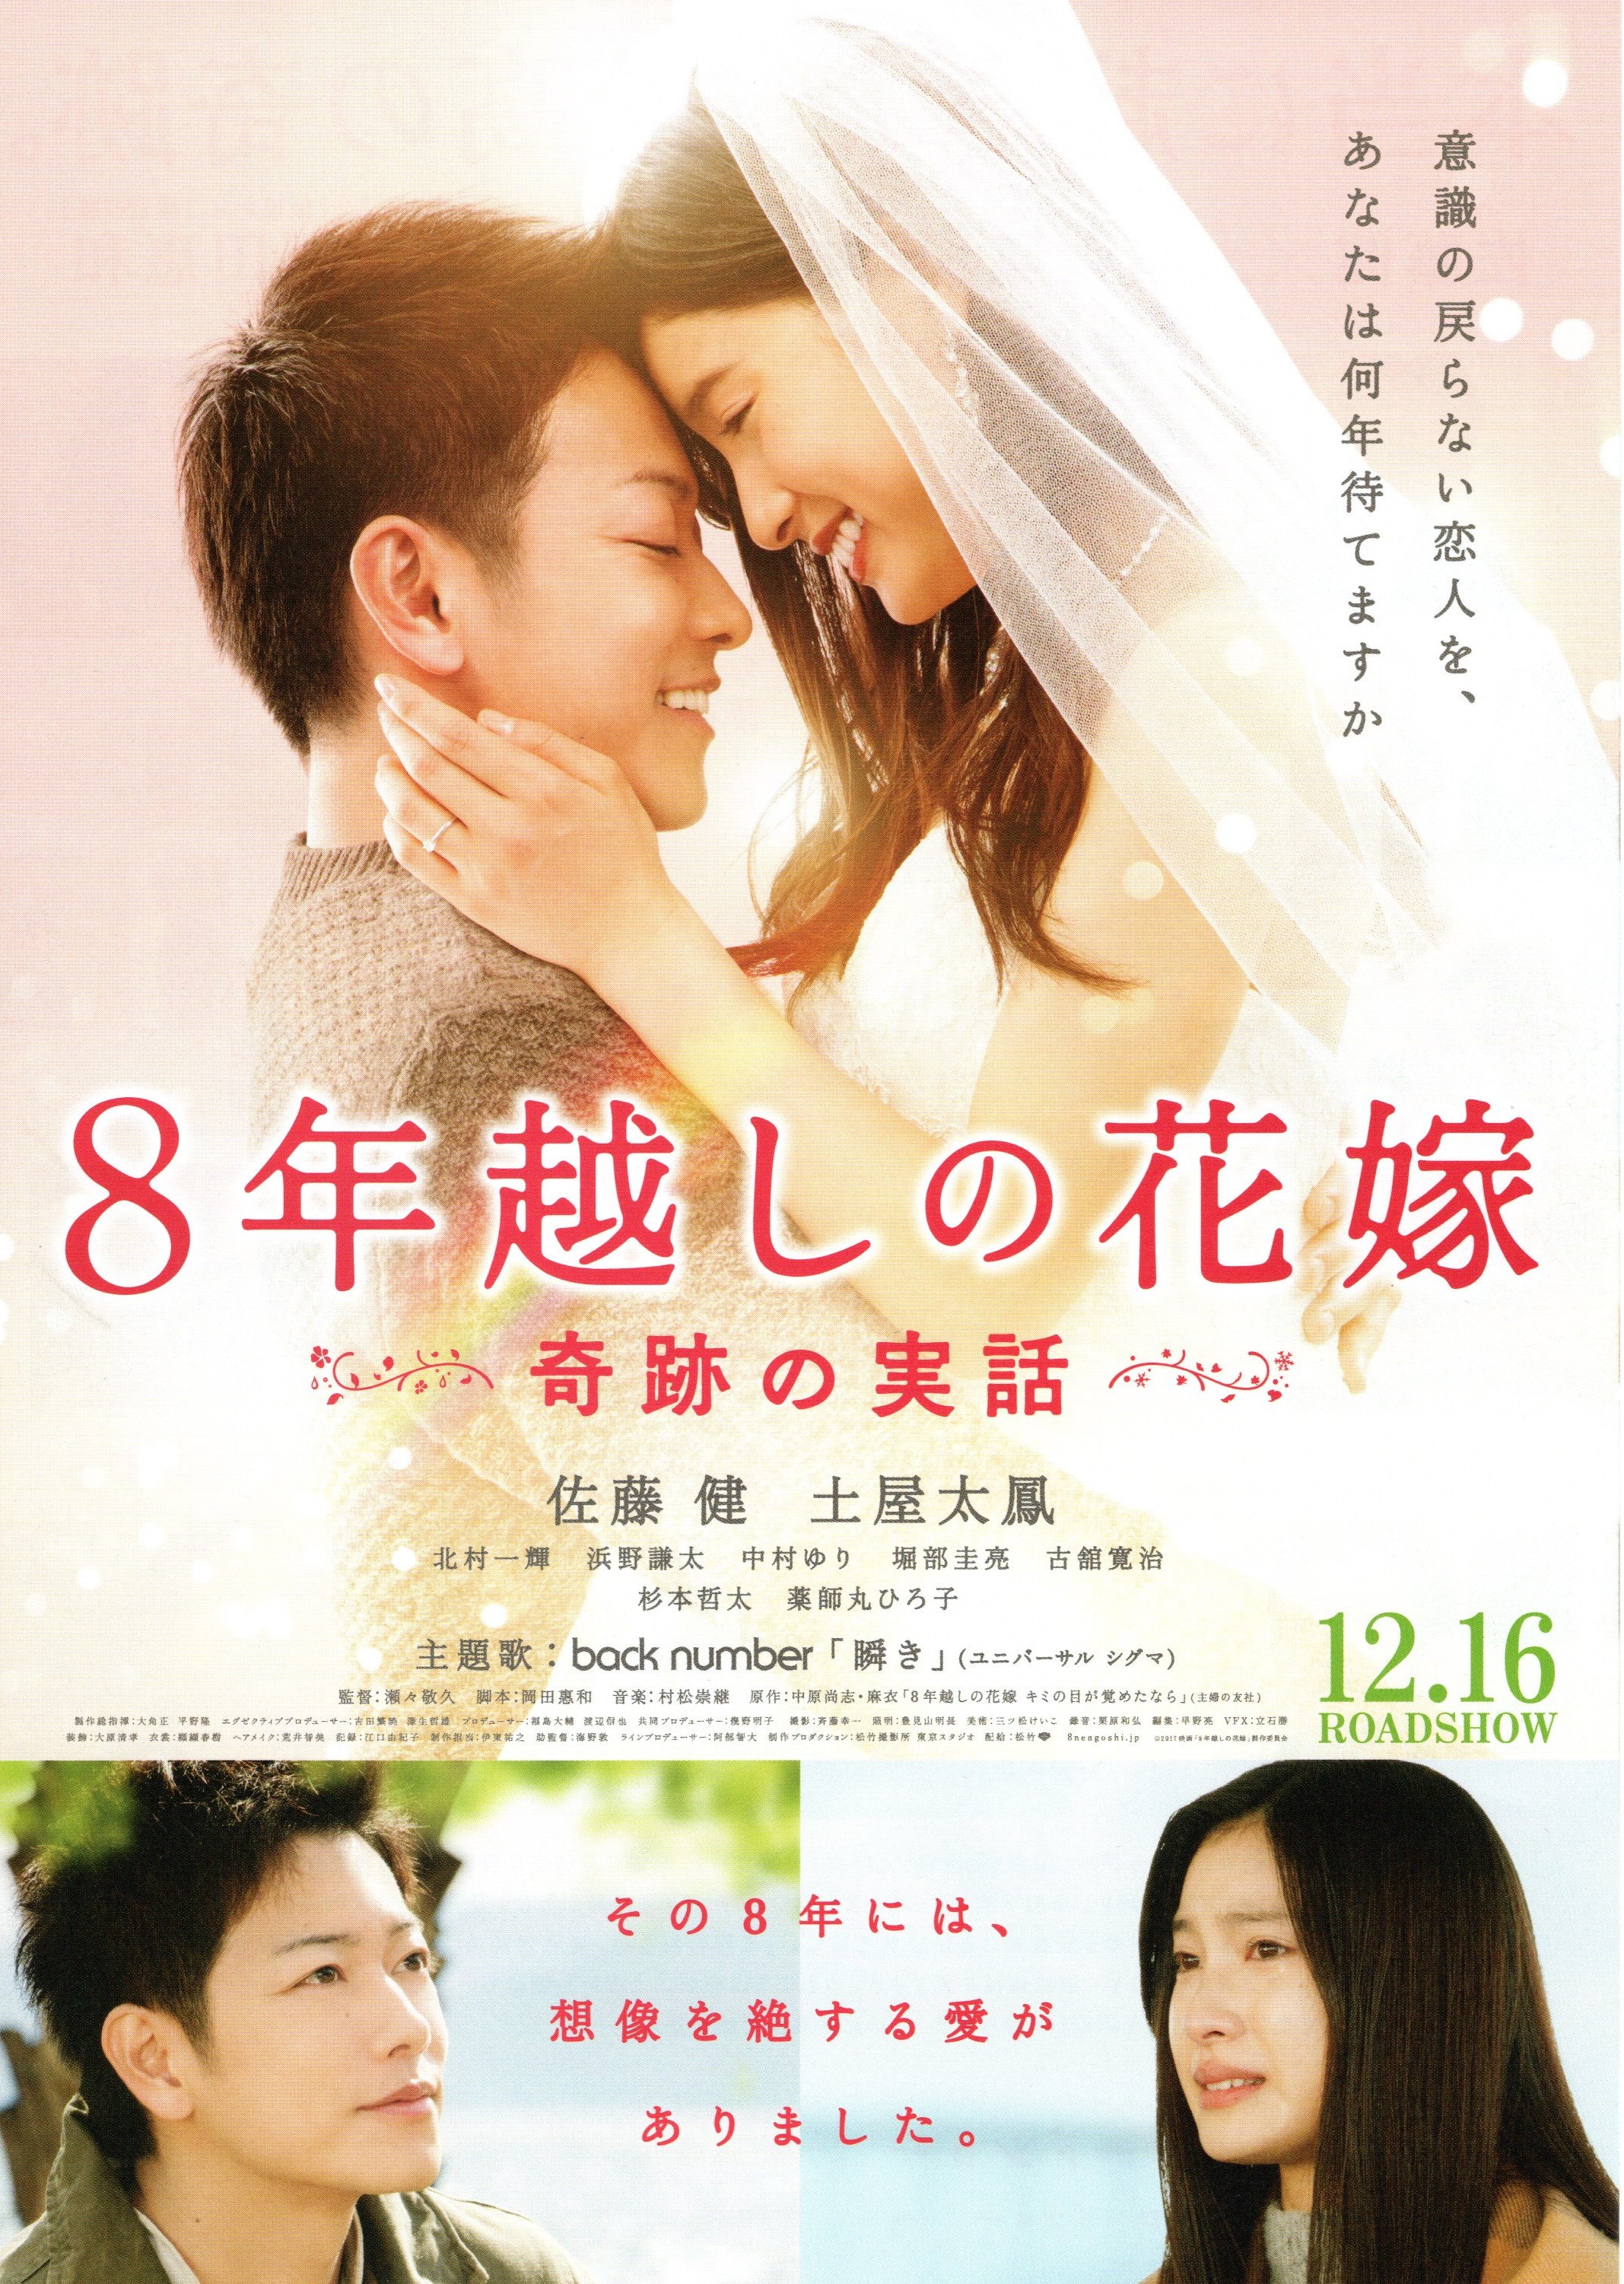 8-year bride poster